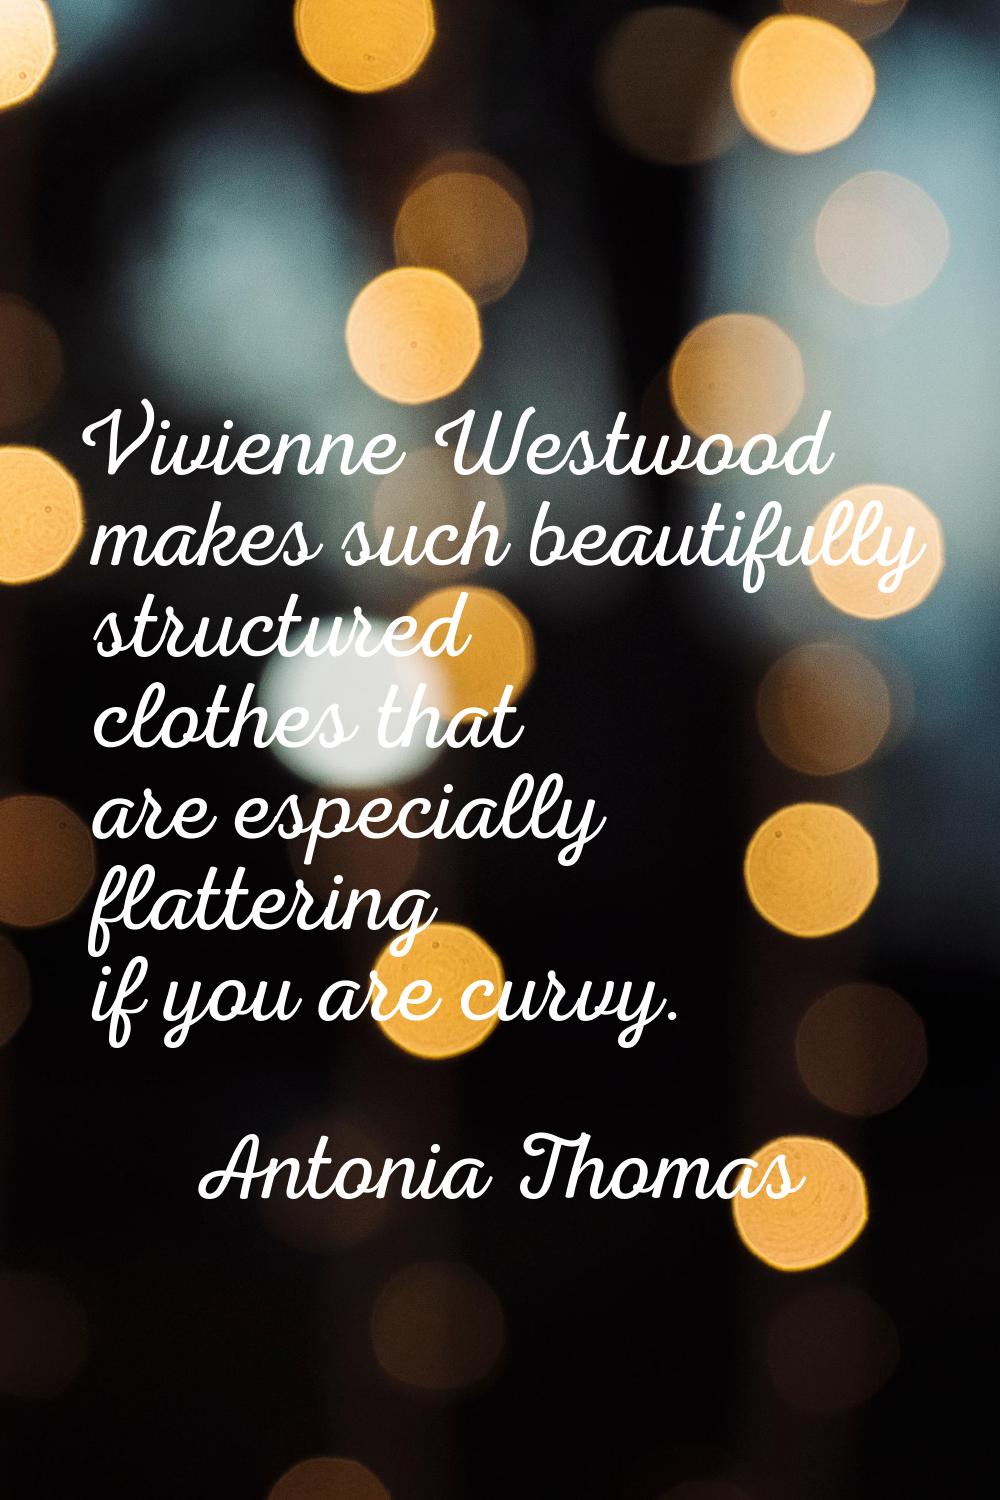 Vivienne Westwood makes such beautifully structured clothes that are especially flattering if you a